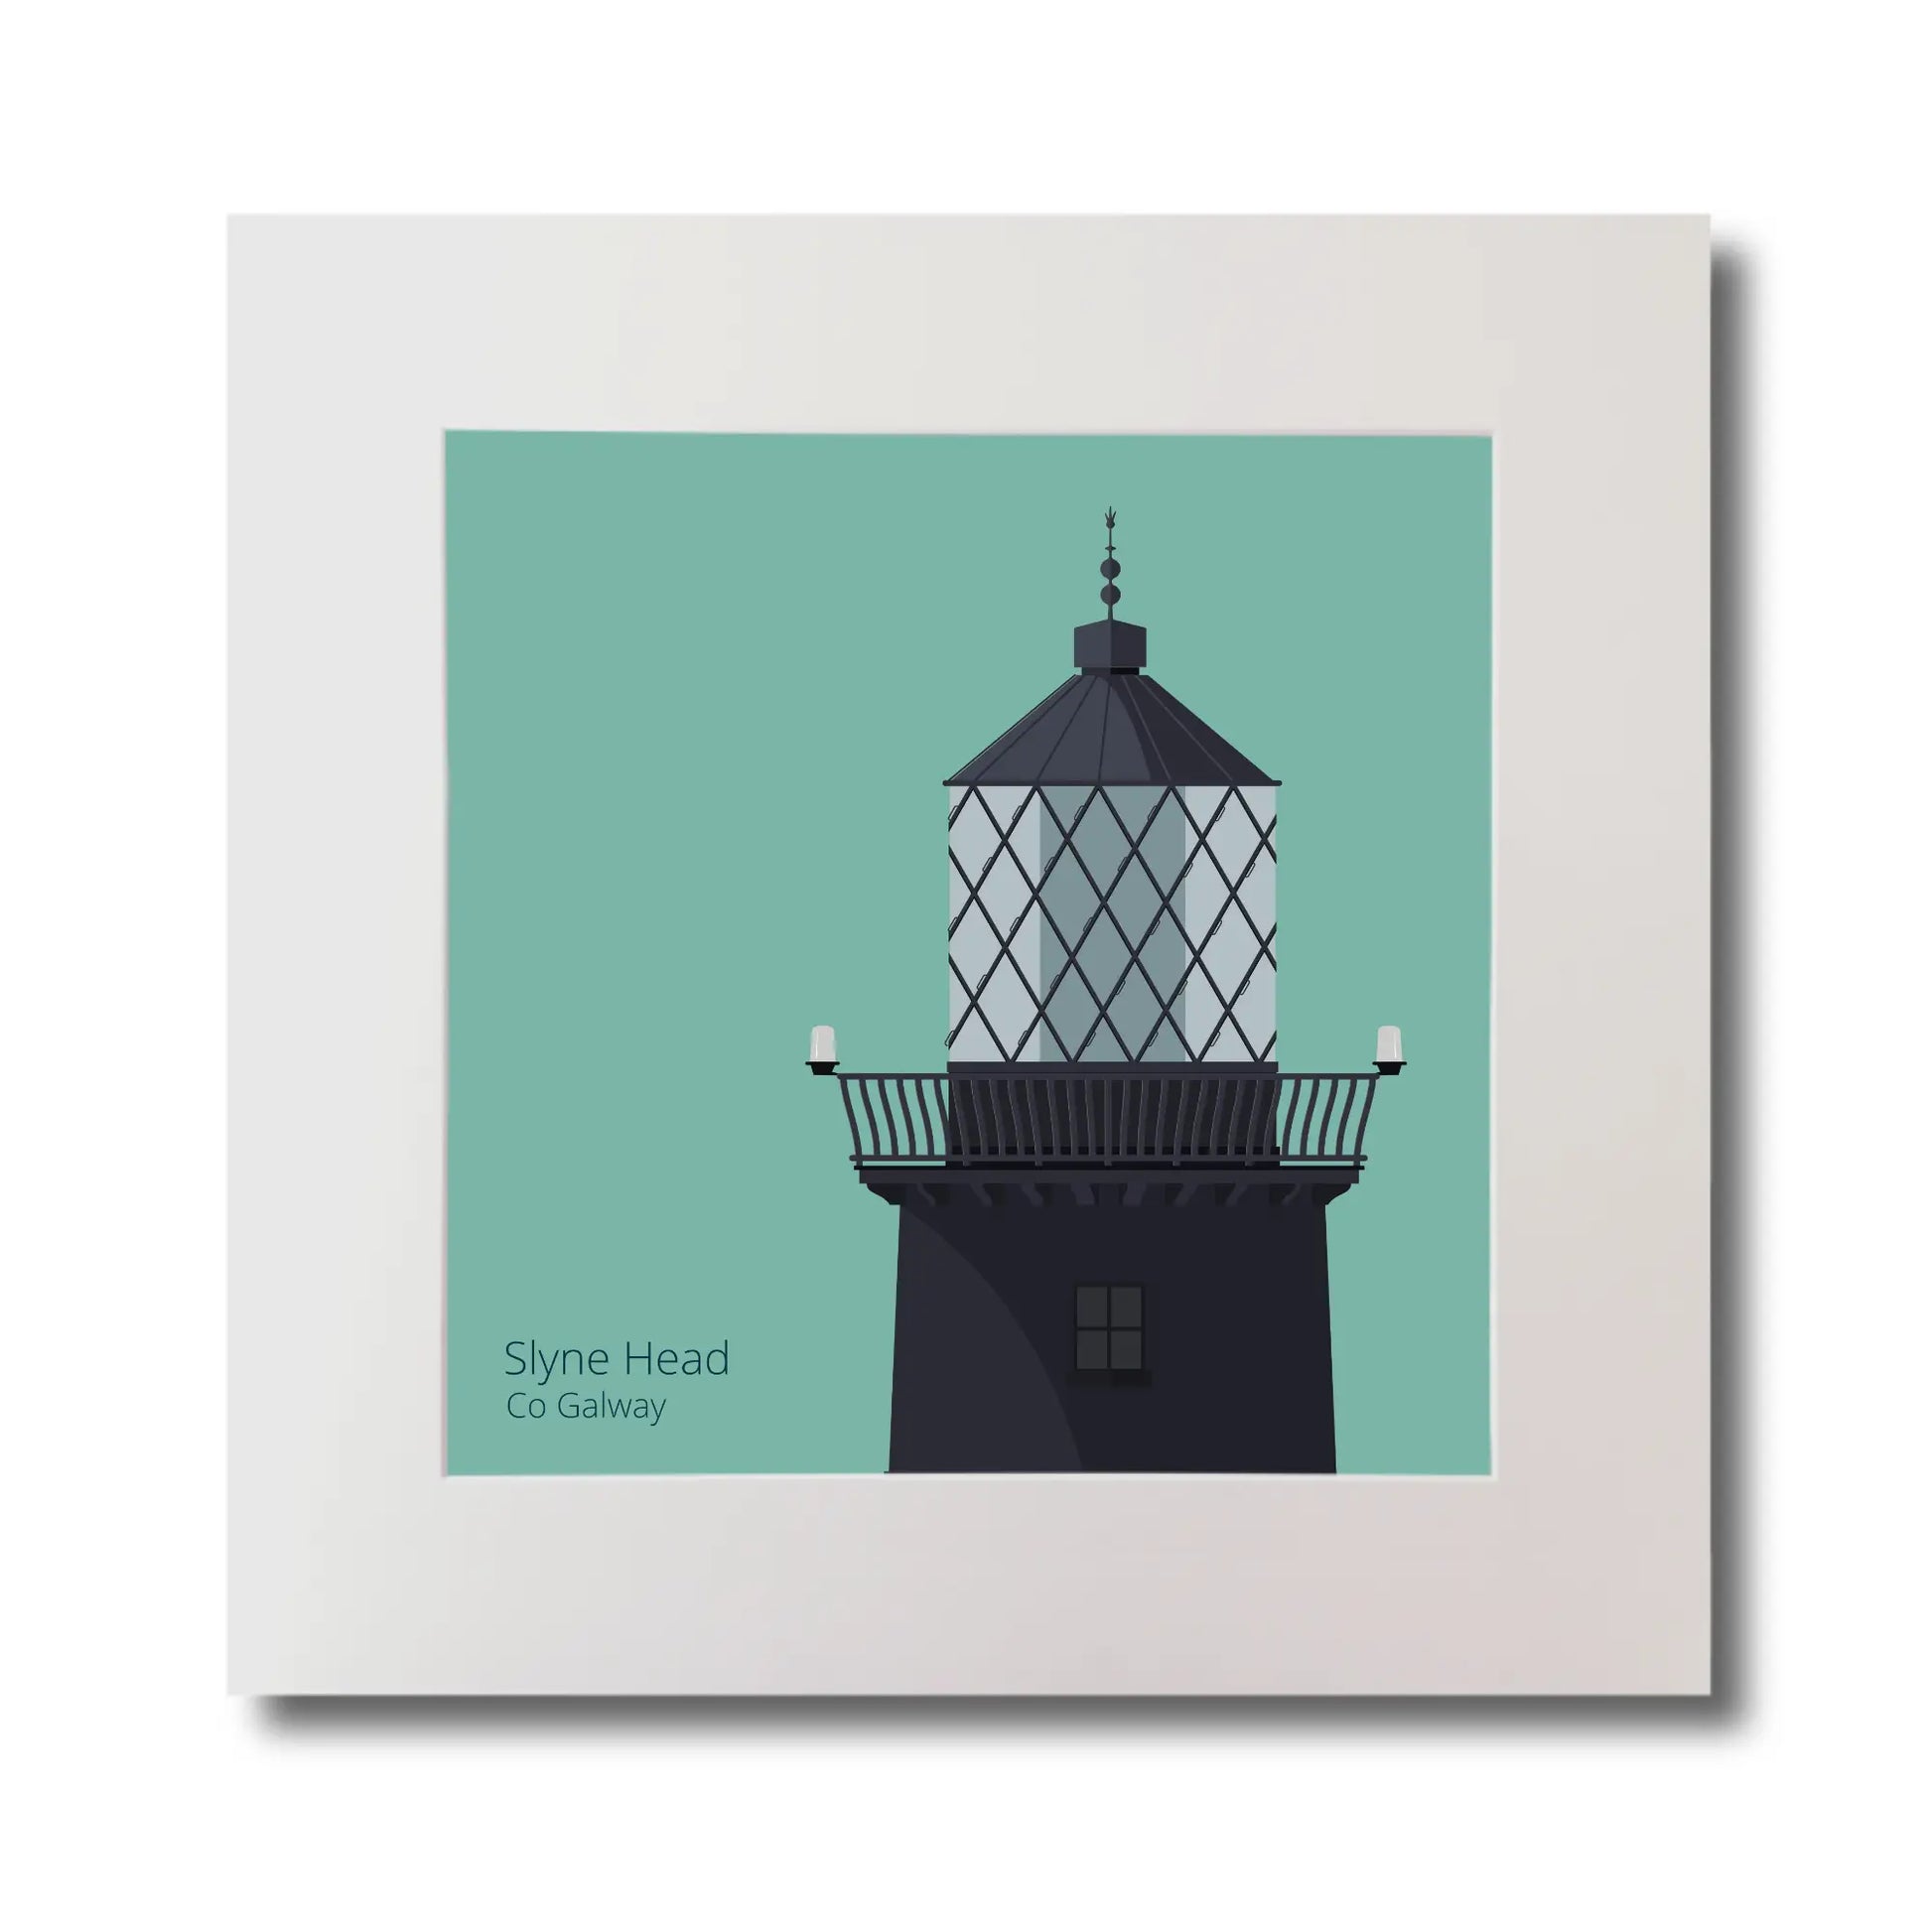 Illustration of Slyne Head lighthouse on an ocean green background, mounted and measuring 30x30cm.